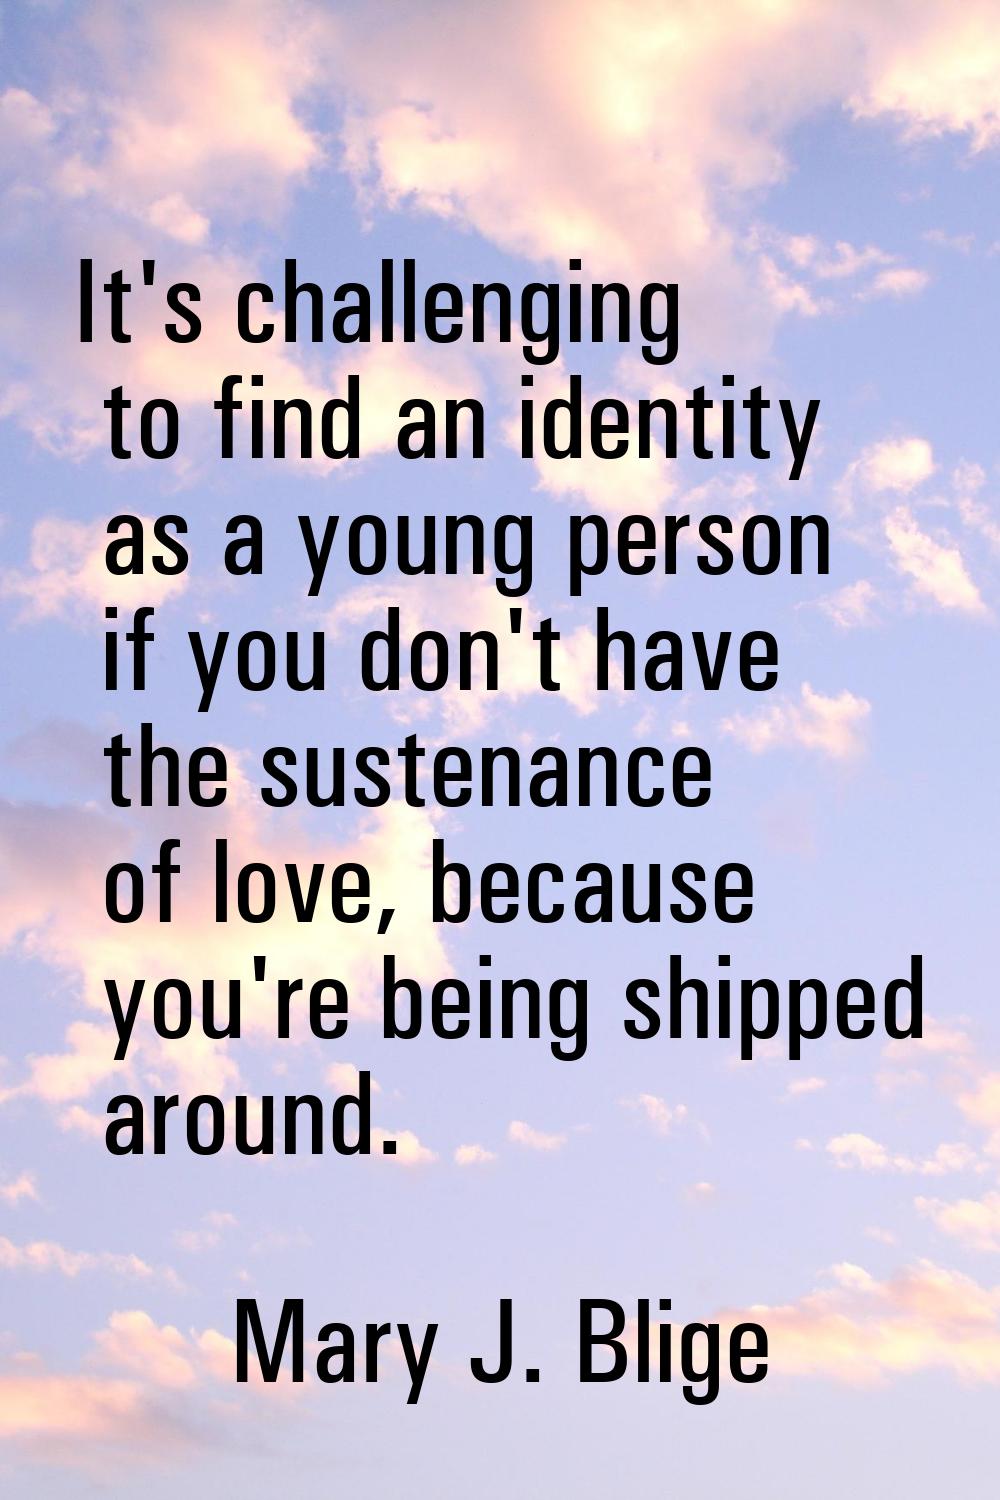 It's challenging to find an identity as a young person if you don't have the sustenance of love, be